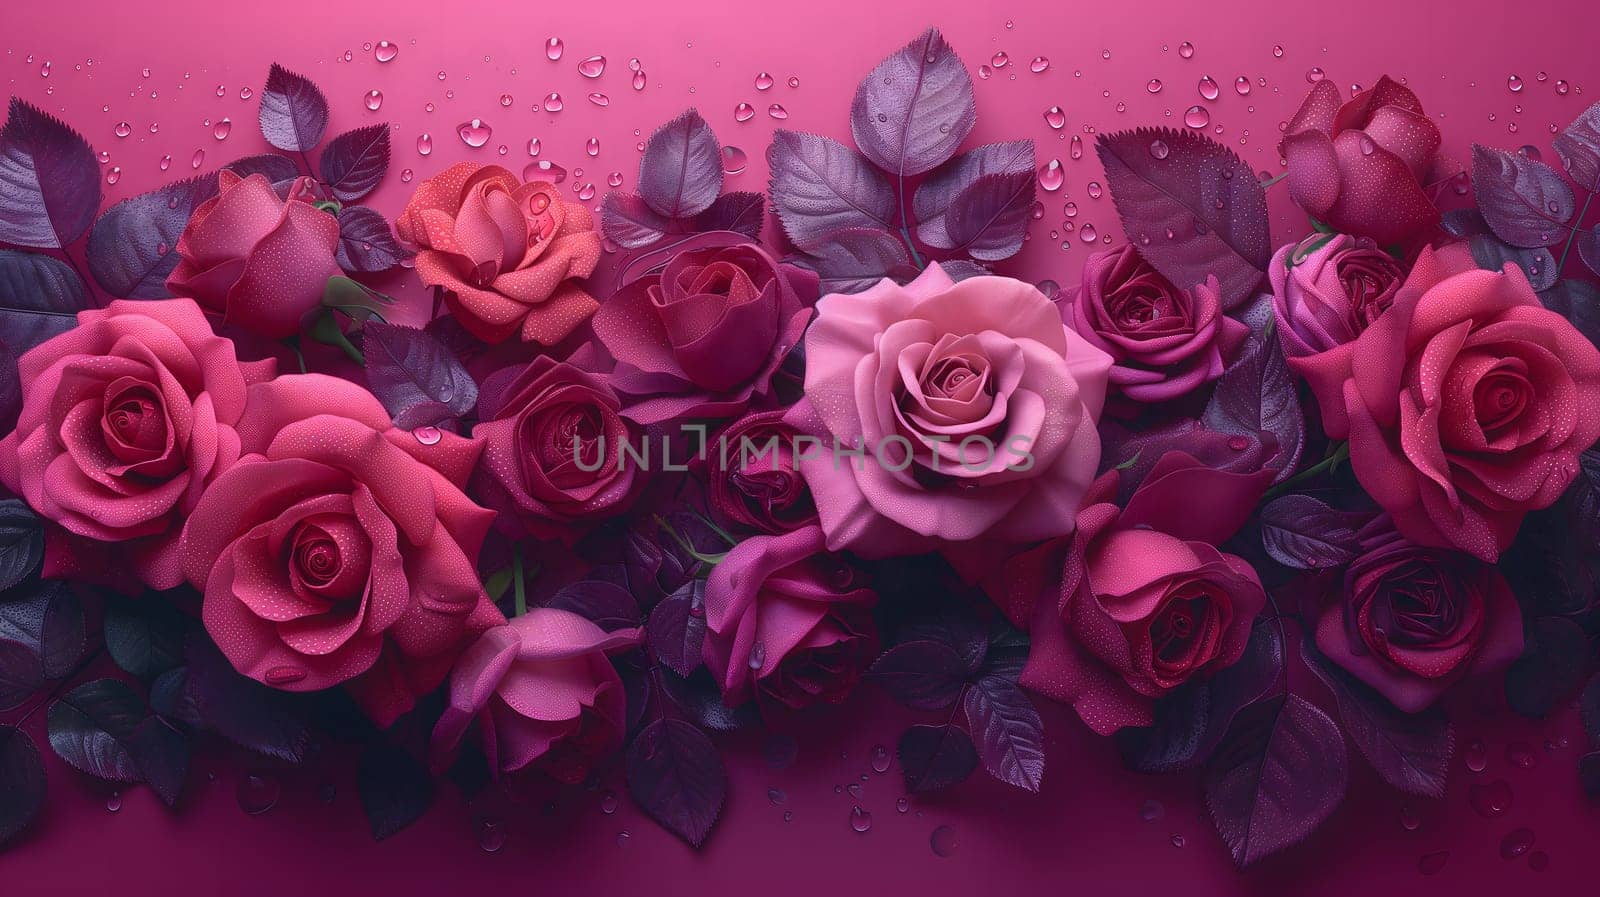 A lush bouquet of pink roses with dew drops. Neural network generated image. Not based on any actual person or scene.